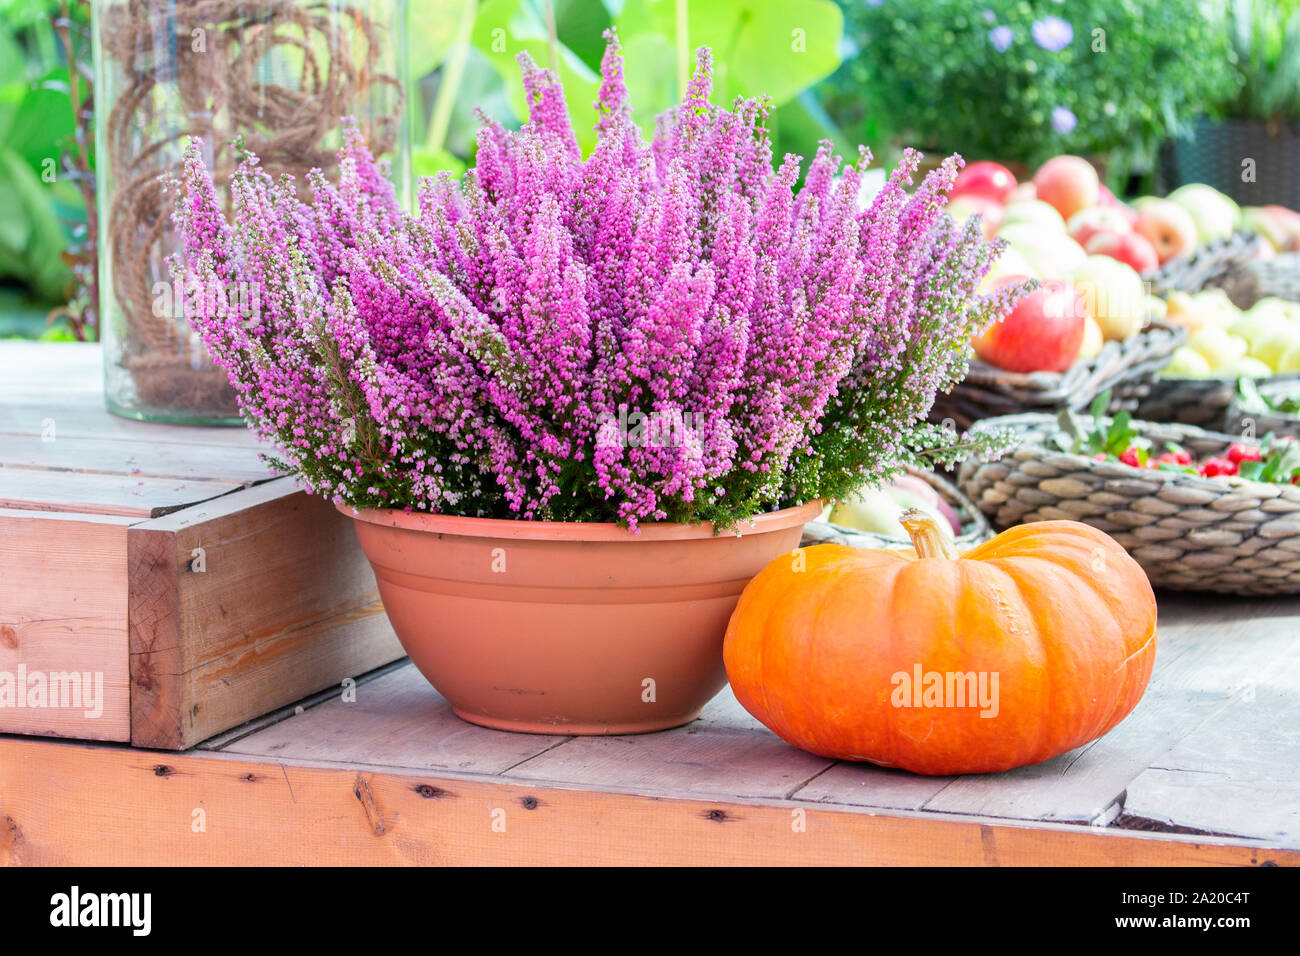 Farm still life, flowering heather bush in a pot and a large ripe orange pumpkin. Erica heather blooms in vibrant pink colors, harvest holiday decorat Stock Photo